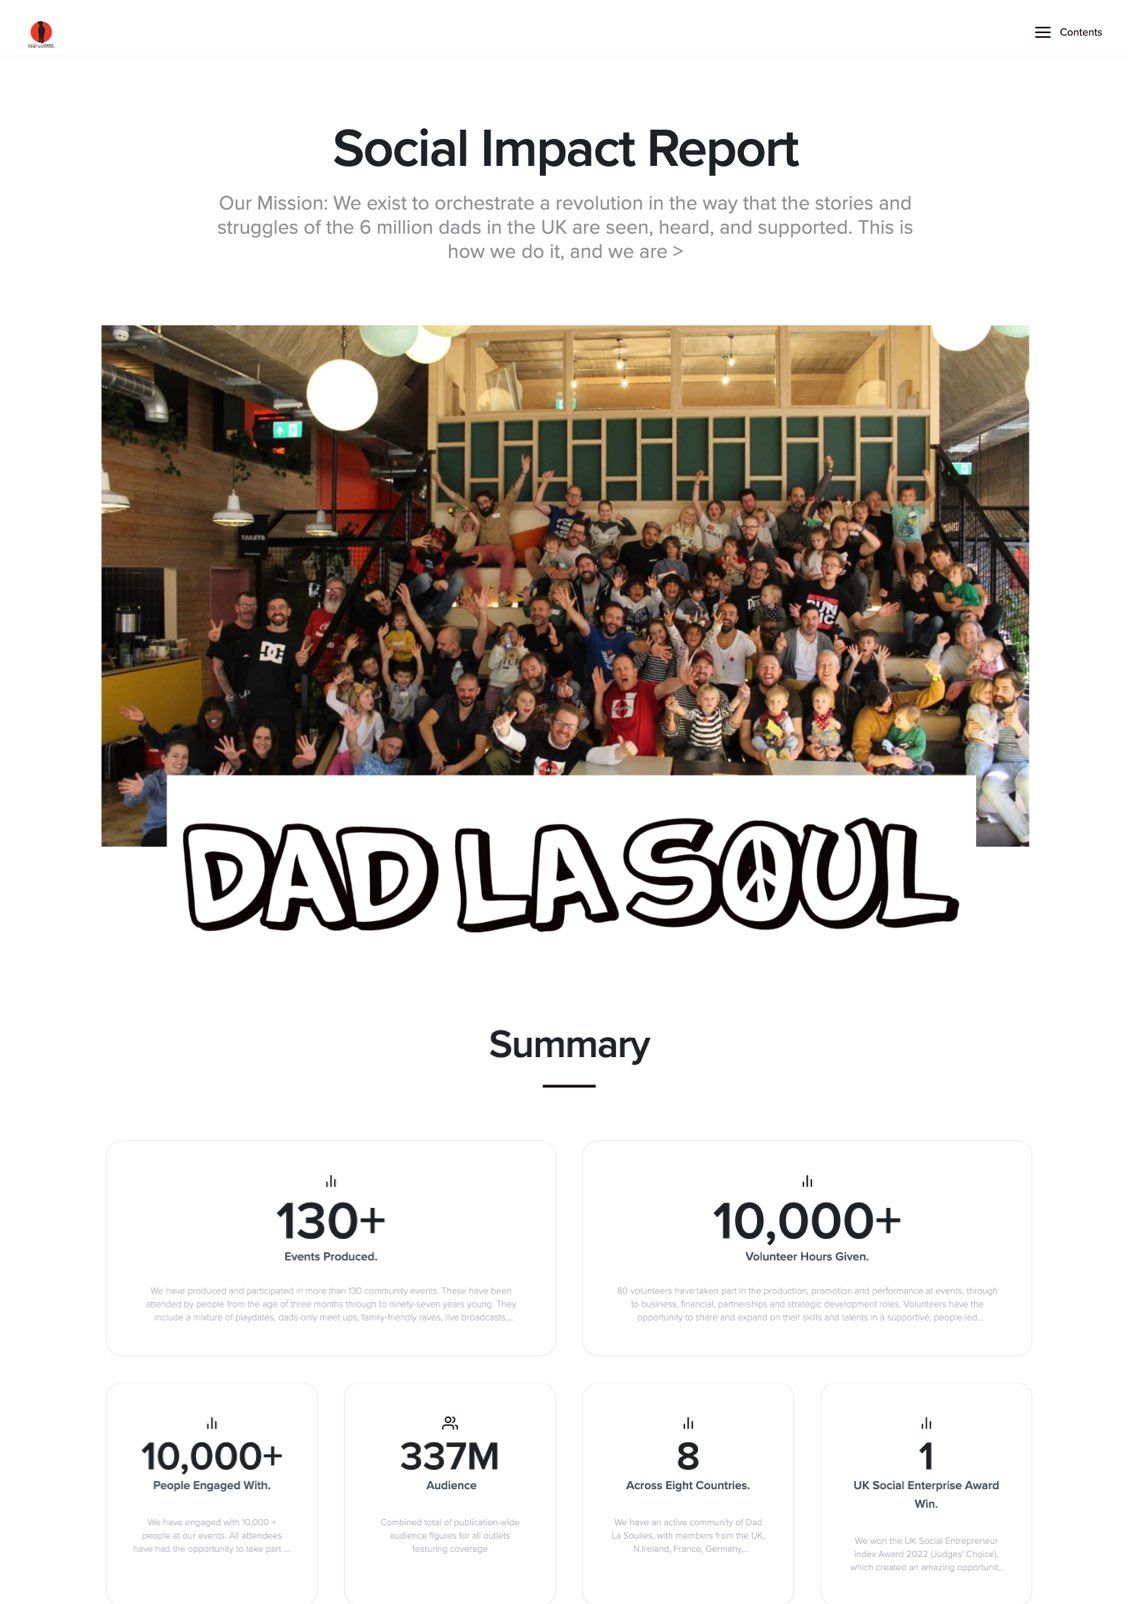 Dad La Soul's book - front cover and metric summary